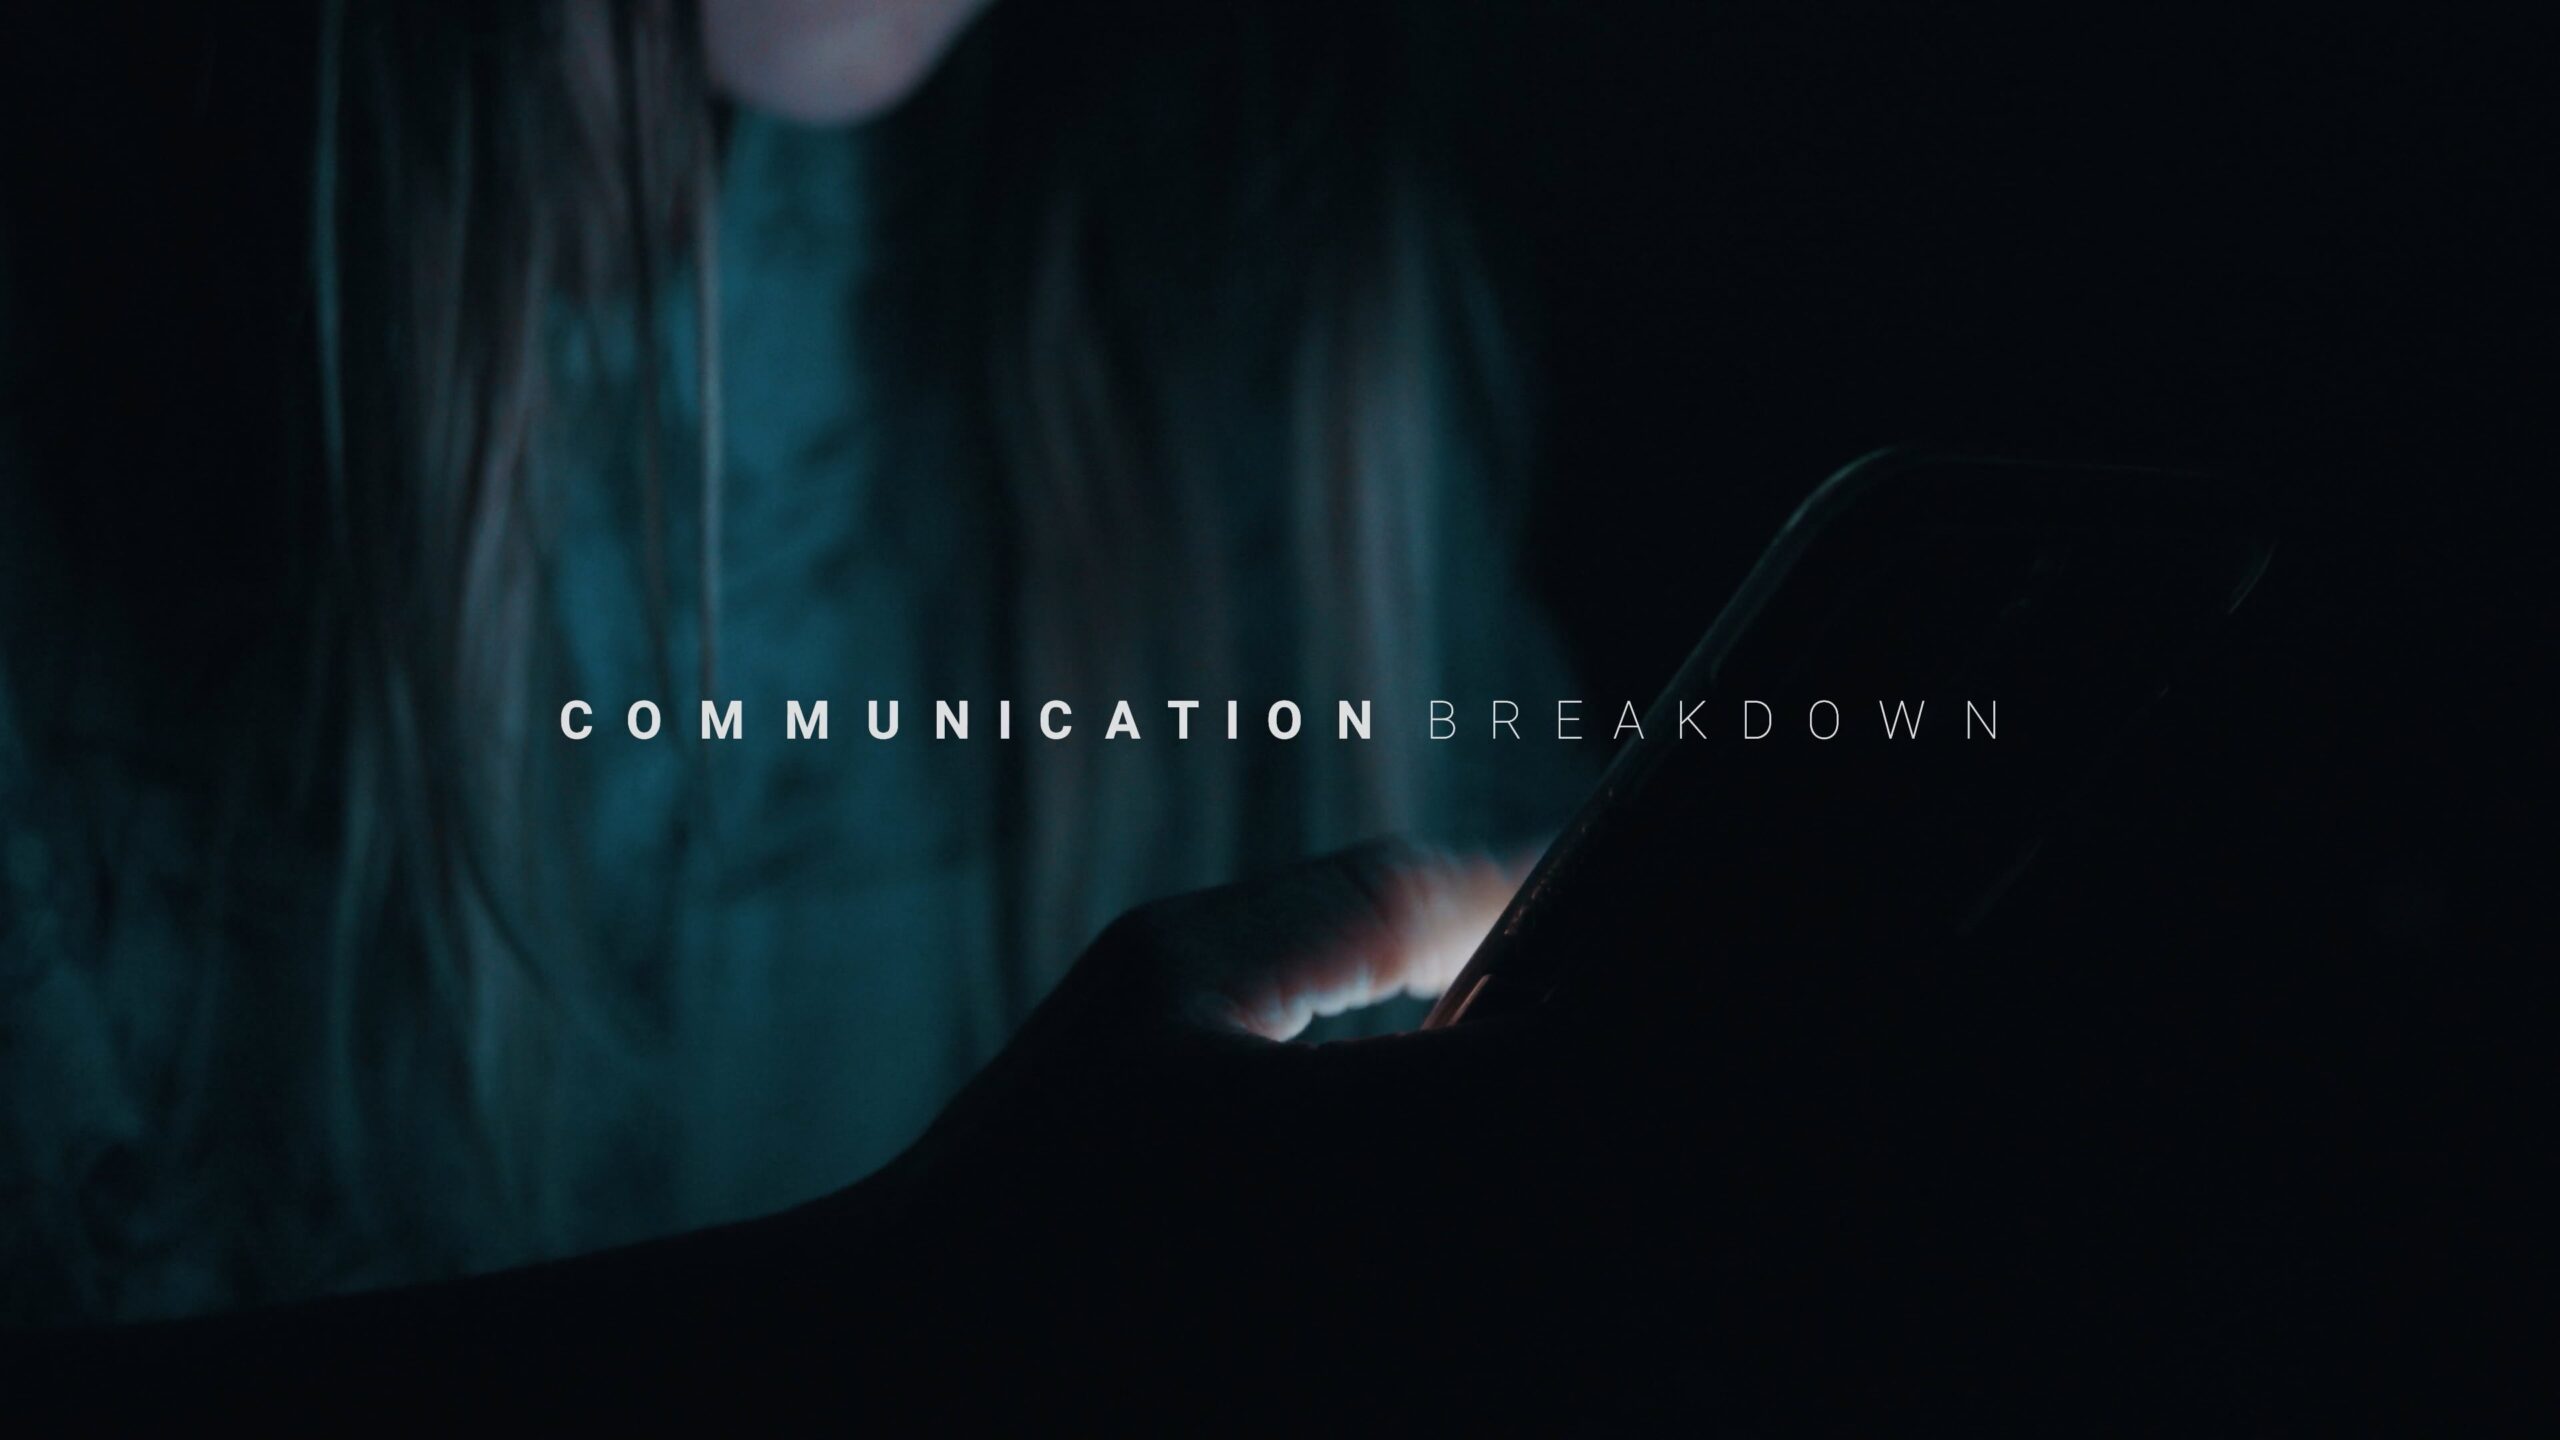 The Silent Epidemic: How Smartphones Are Redefining Communication